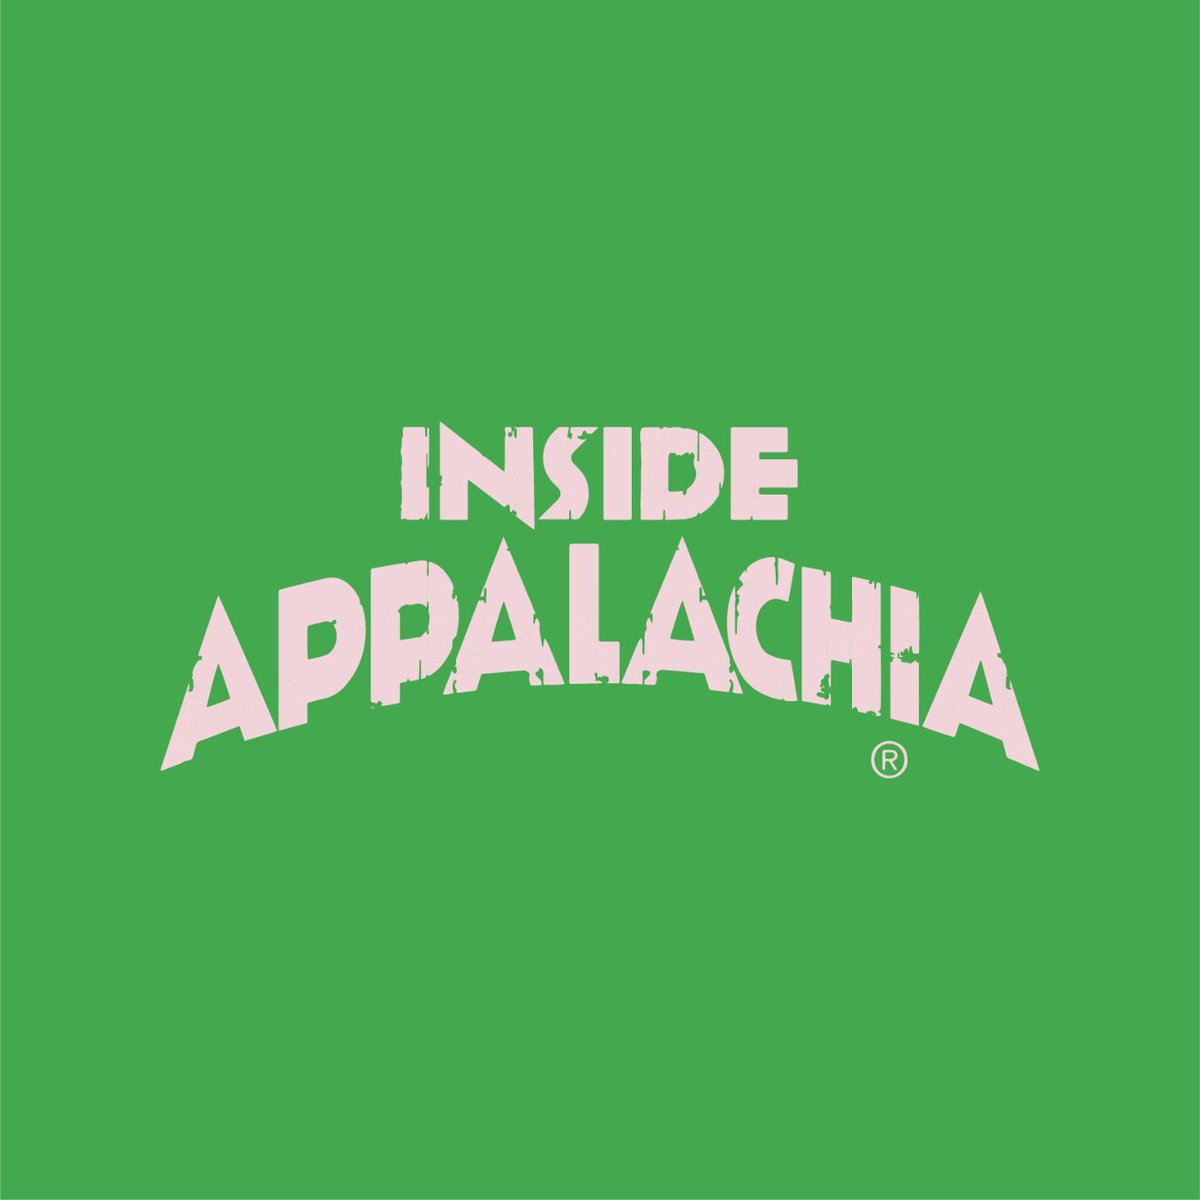 This week on #InsideAppalachia 🌄, we’re talking about traditional ballads. In this special episode with guest co-host, ballad singer Saro Lynch-Thomason, we explore songs about lawbreaking folk heroes, runaway trains and murder ballads. Listen SUNDAY at 7AM & 6PM on @wvpublic.